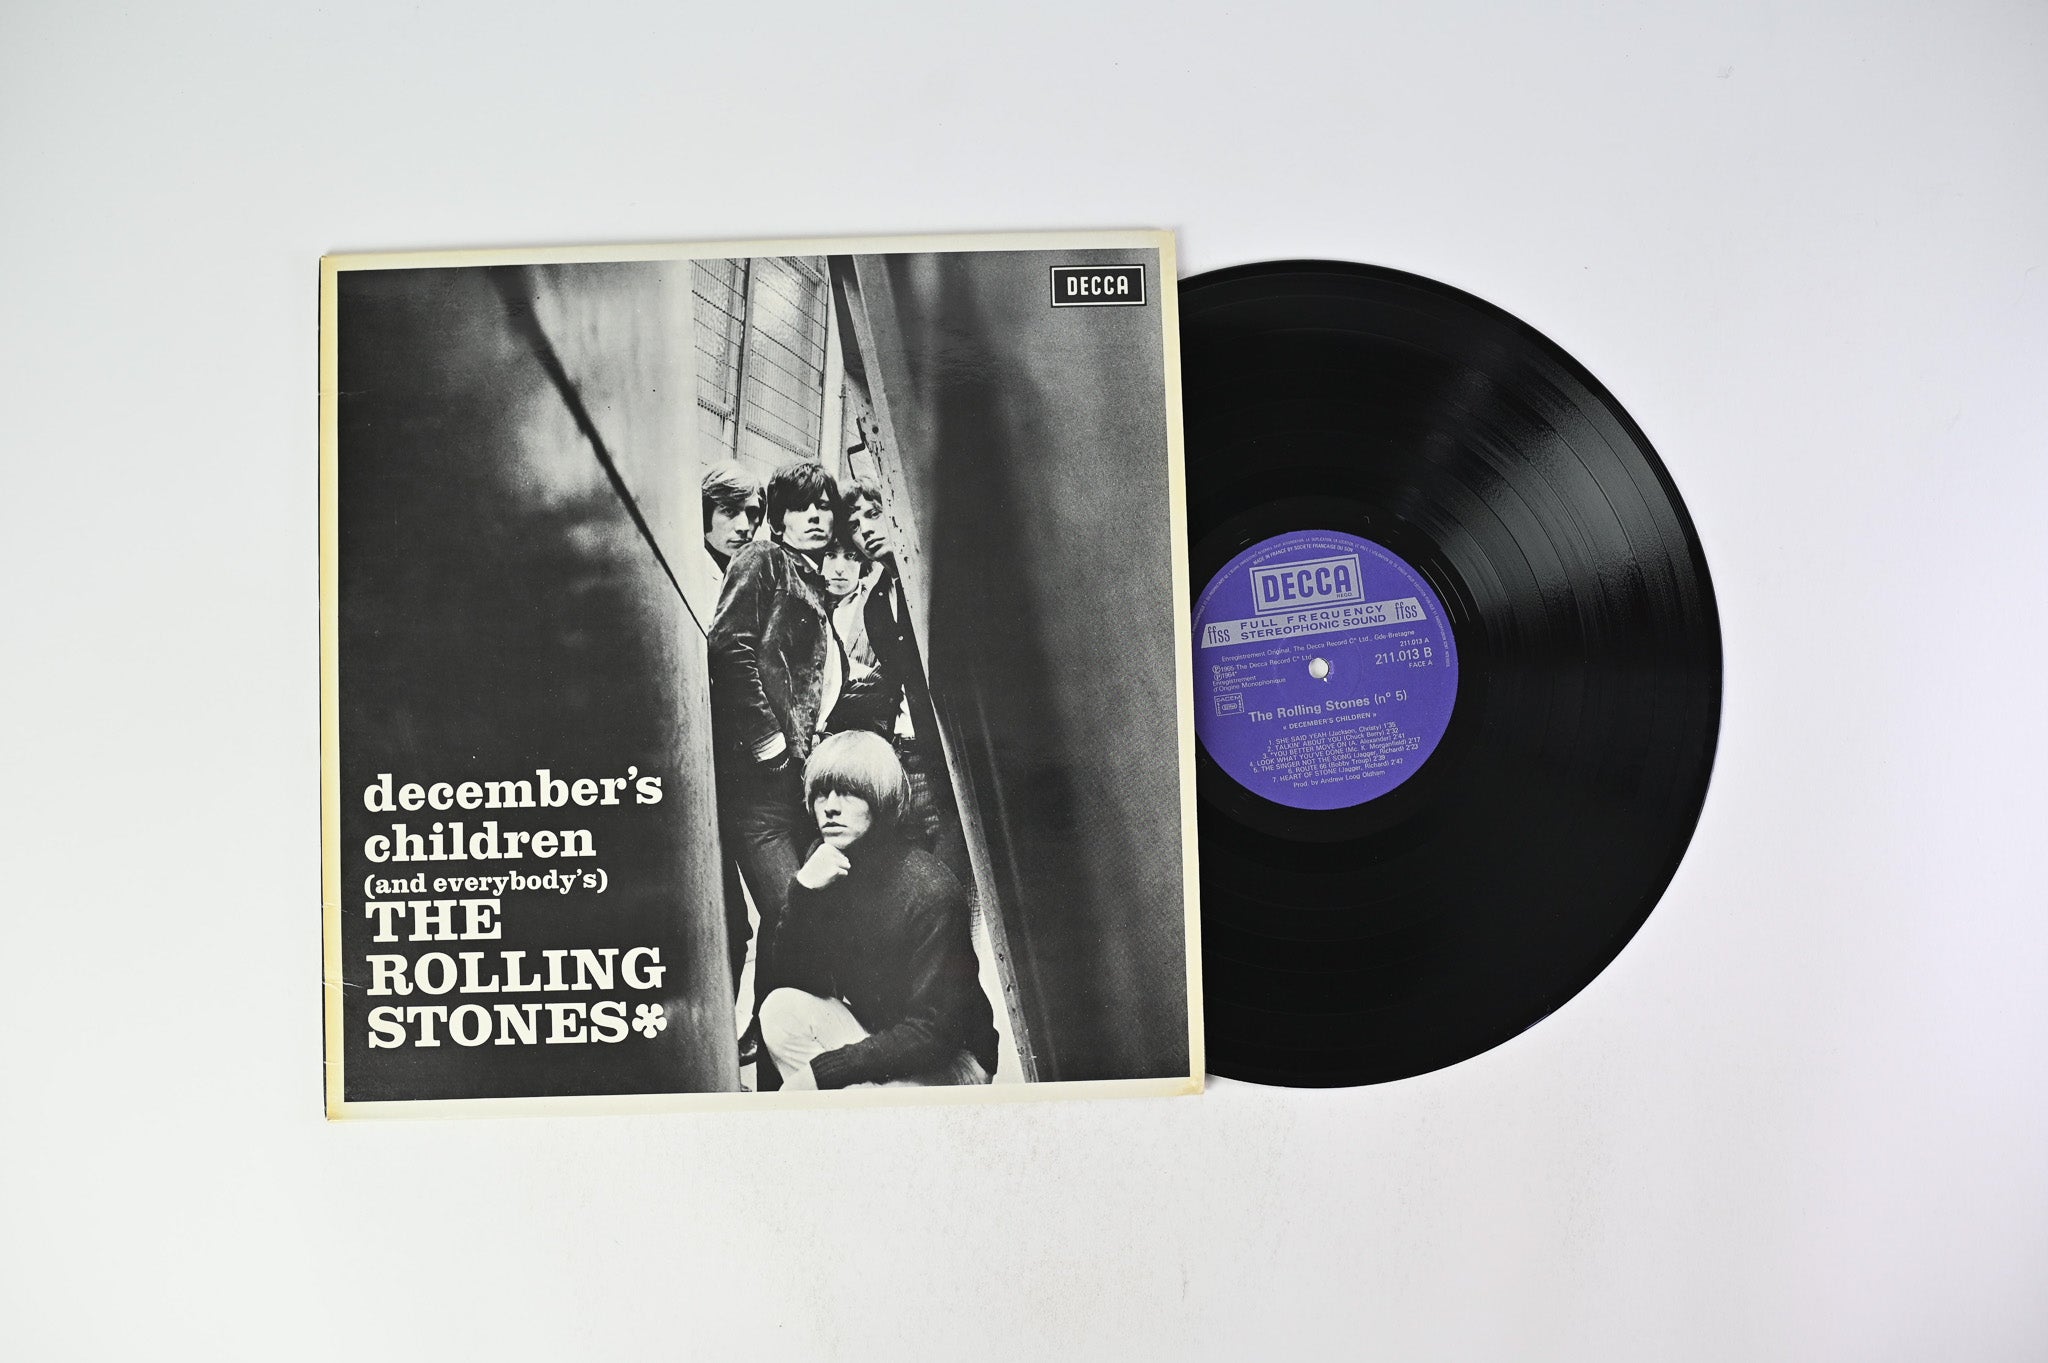 The Rolling Stones - December's Children (And Everybody's) on Decca Mono French Reissue